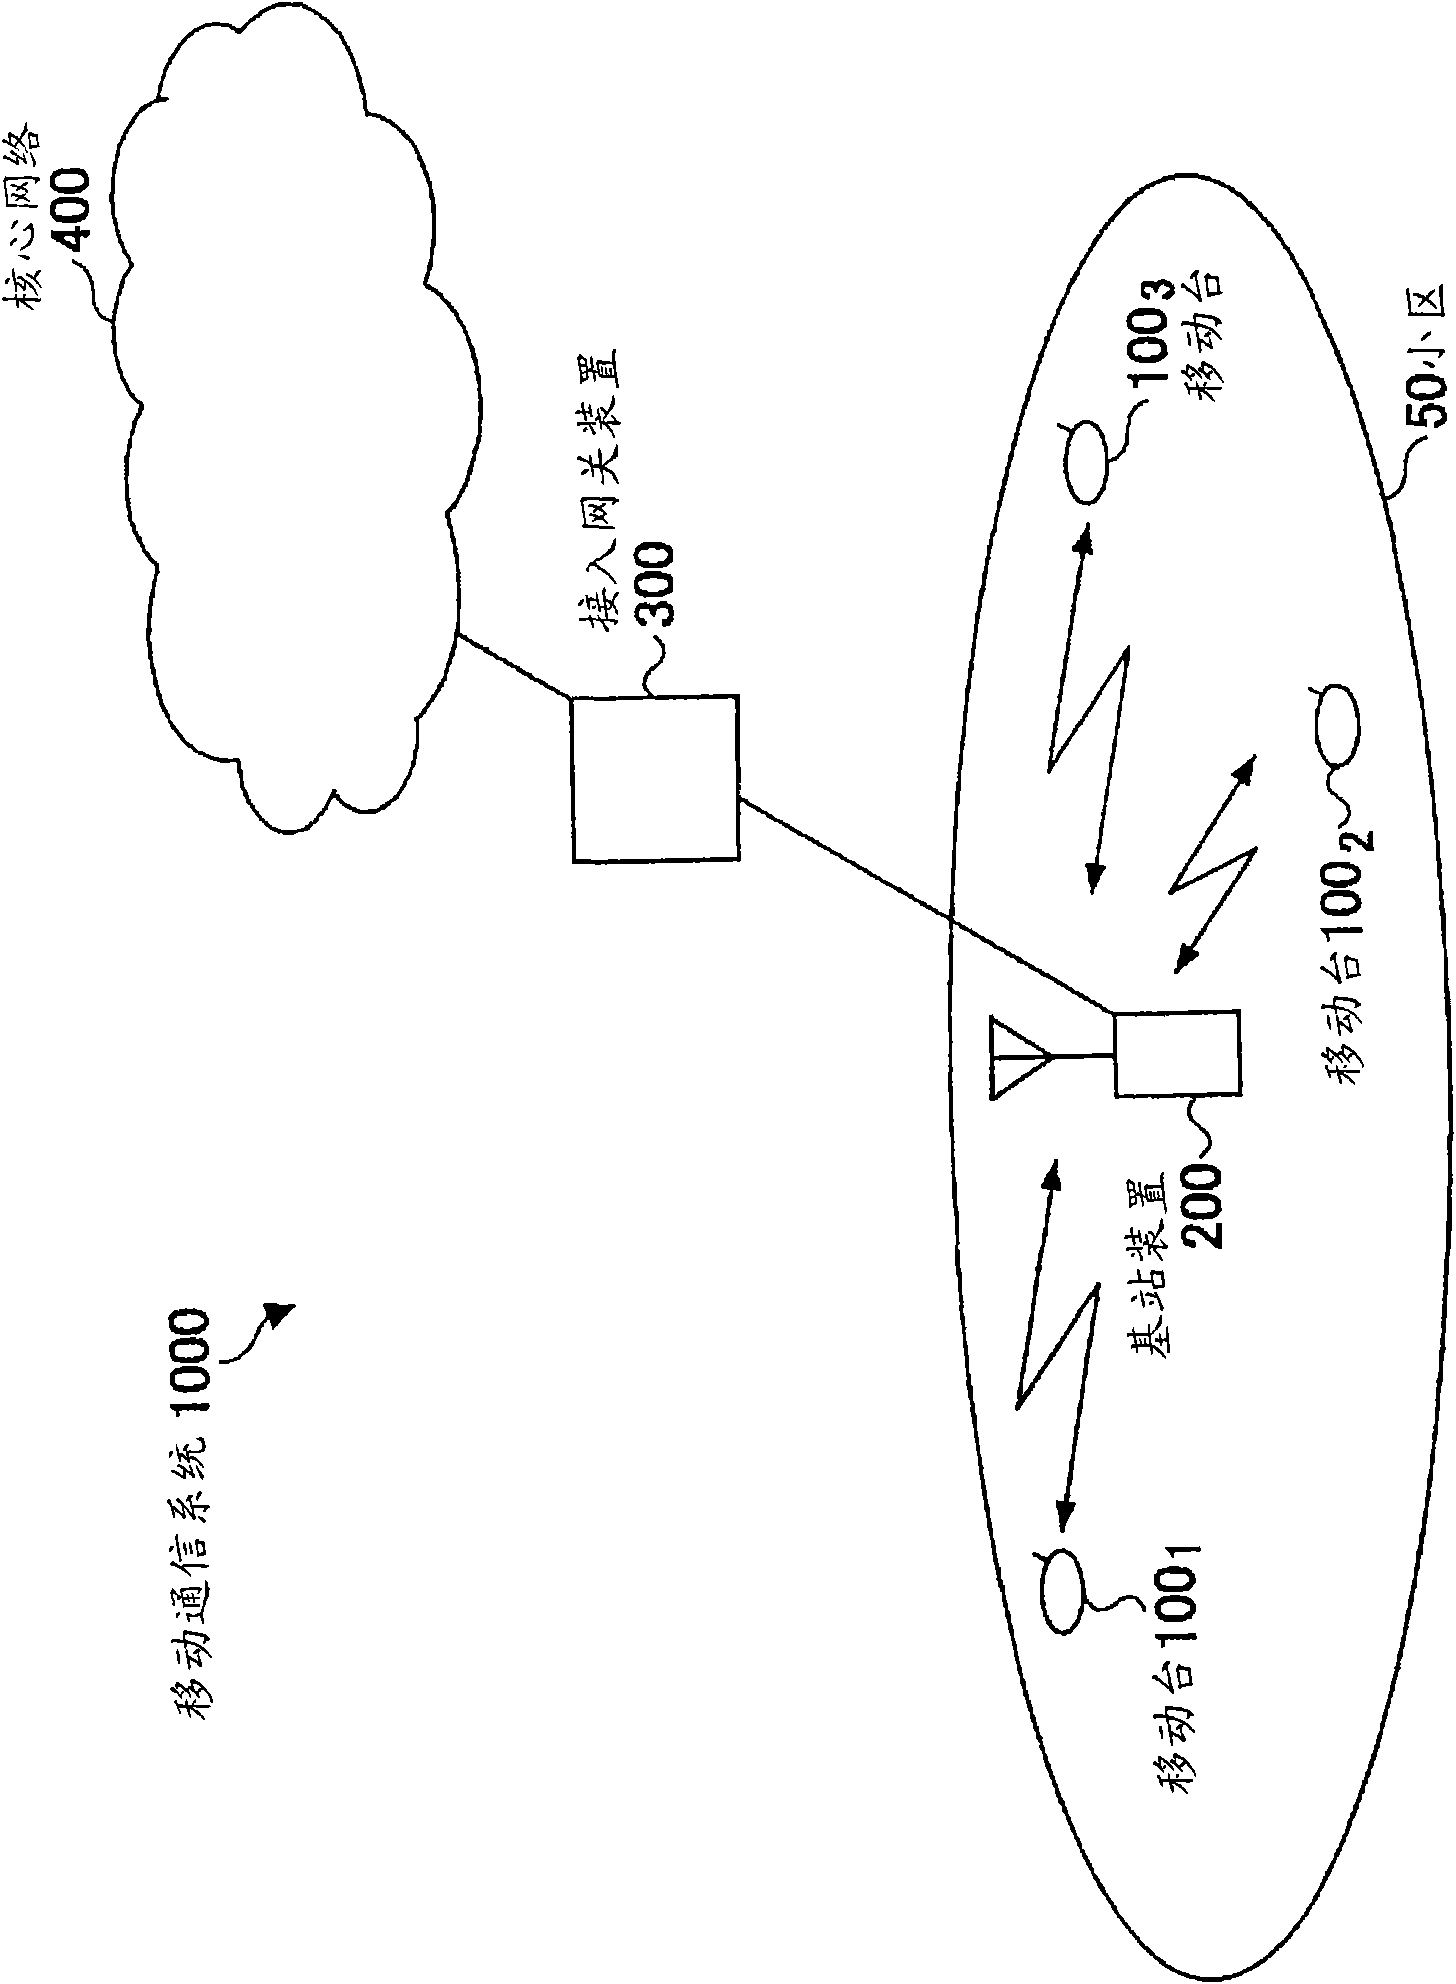 Mobile communication system, base station device, and user device and method